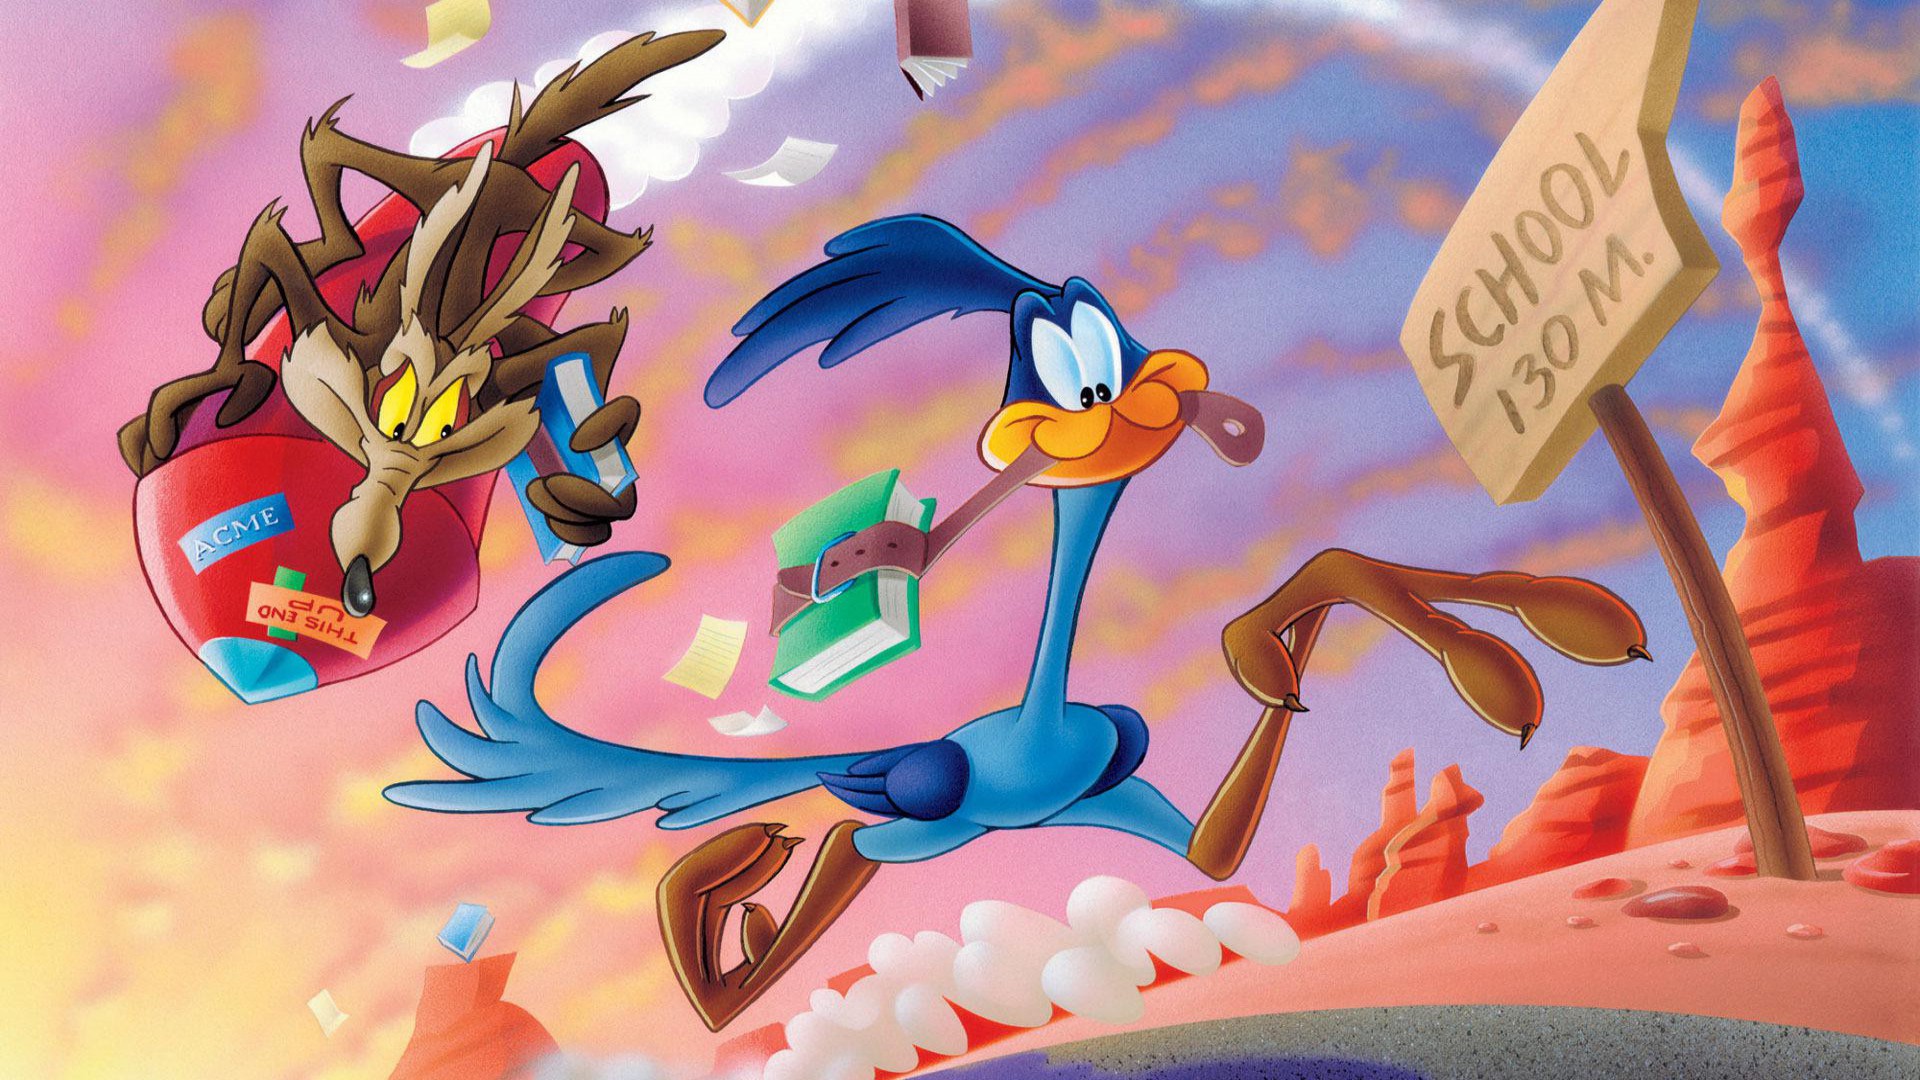 The Road Runner Show (TV Series 1949 - 2010)